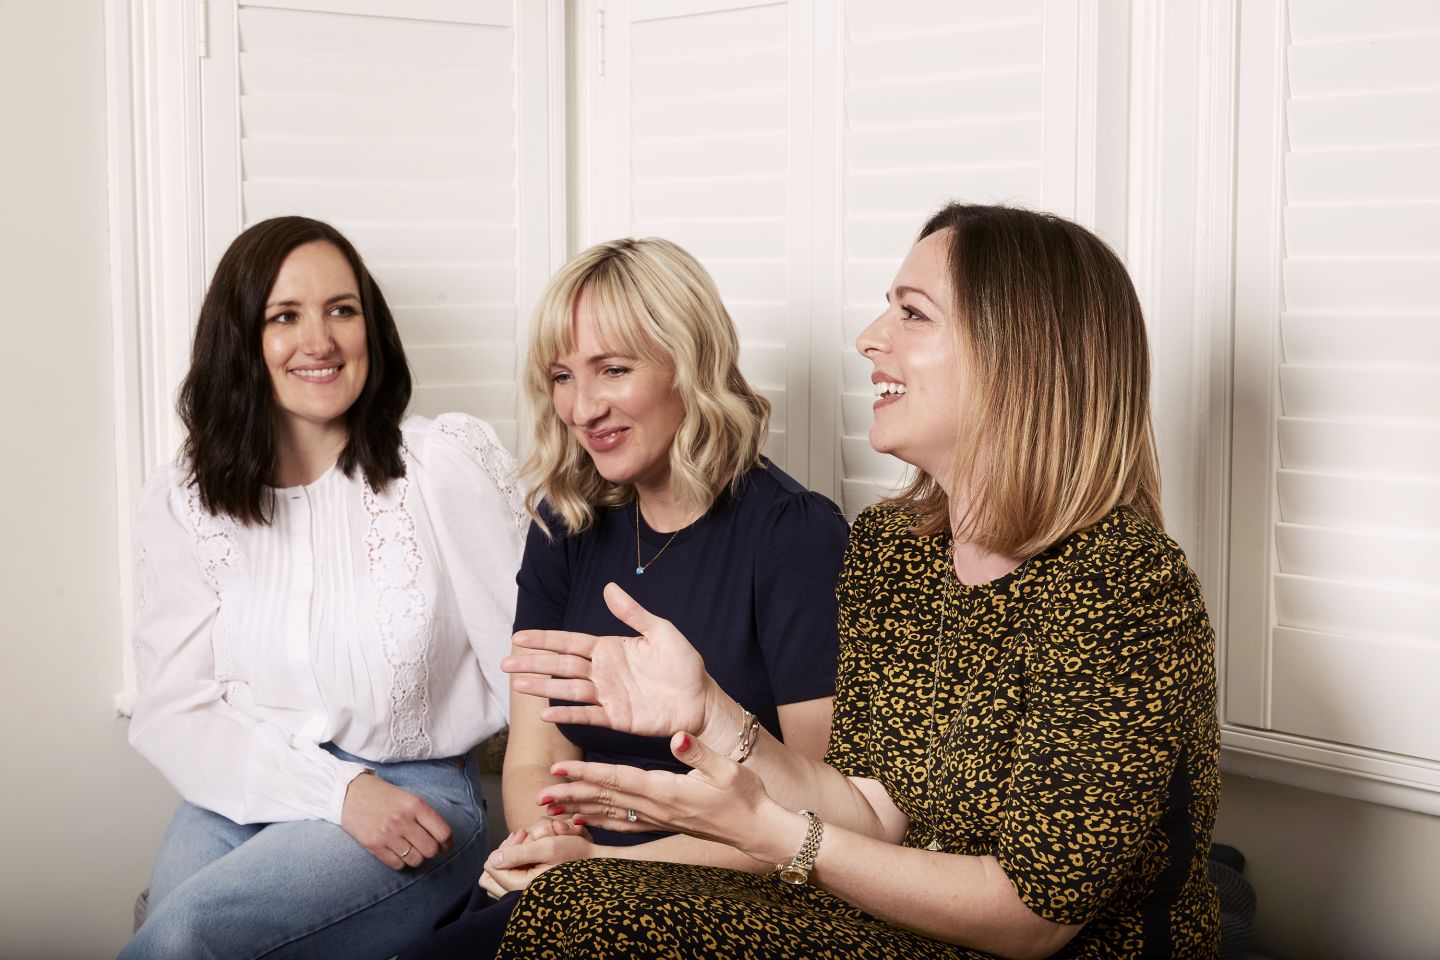 The founders of Fertility Circle laughing in conversation